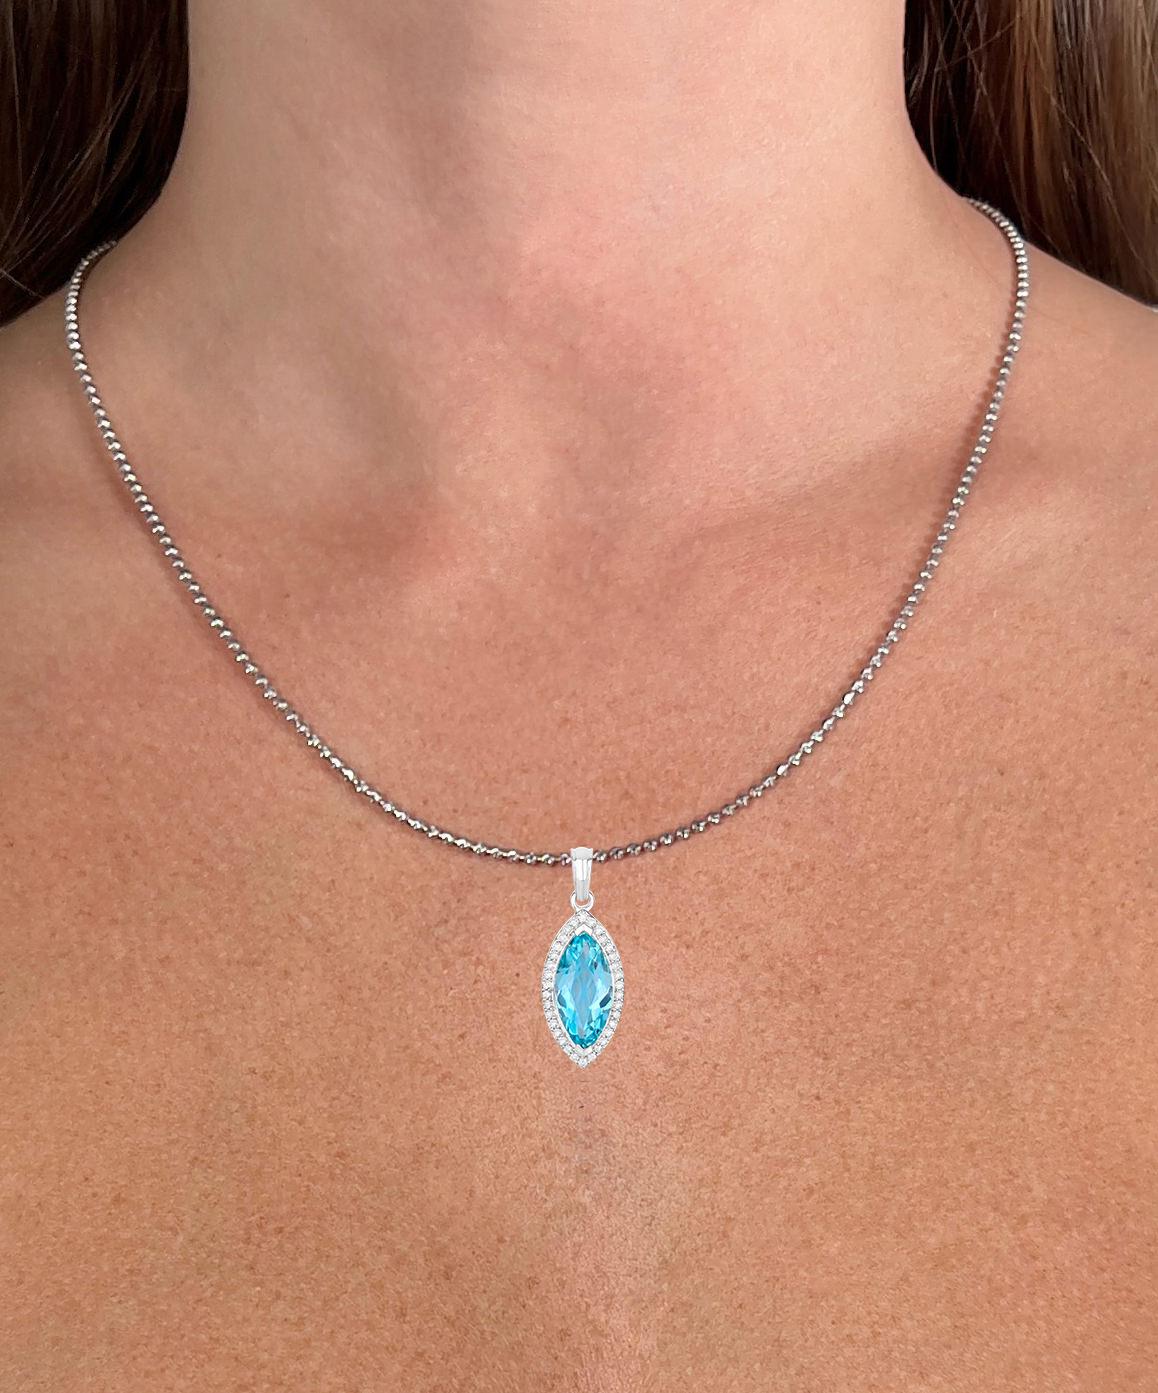 Contemporary Aquamarine Necklace With Diamond Halo 2.55 Carats 14K White Gold For Sale